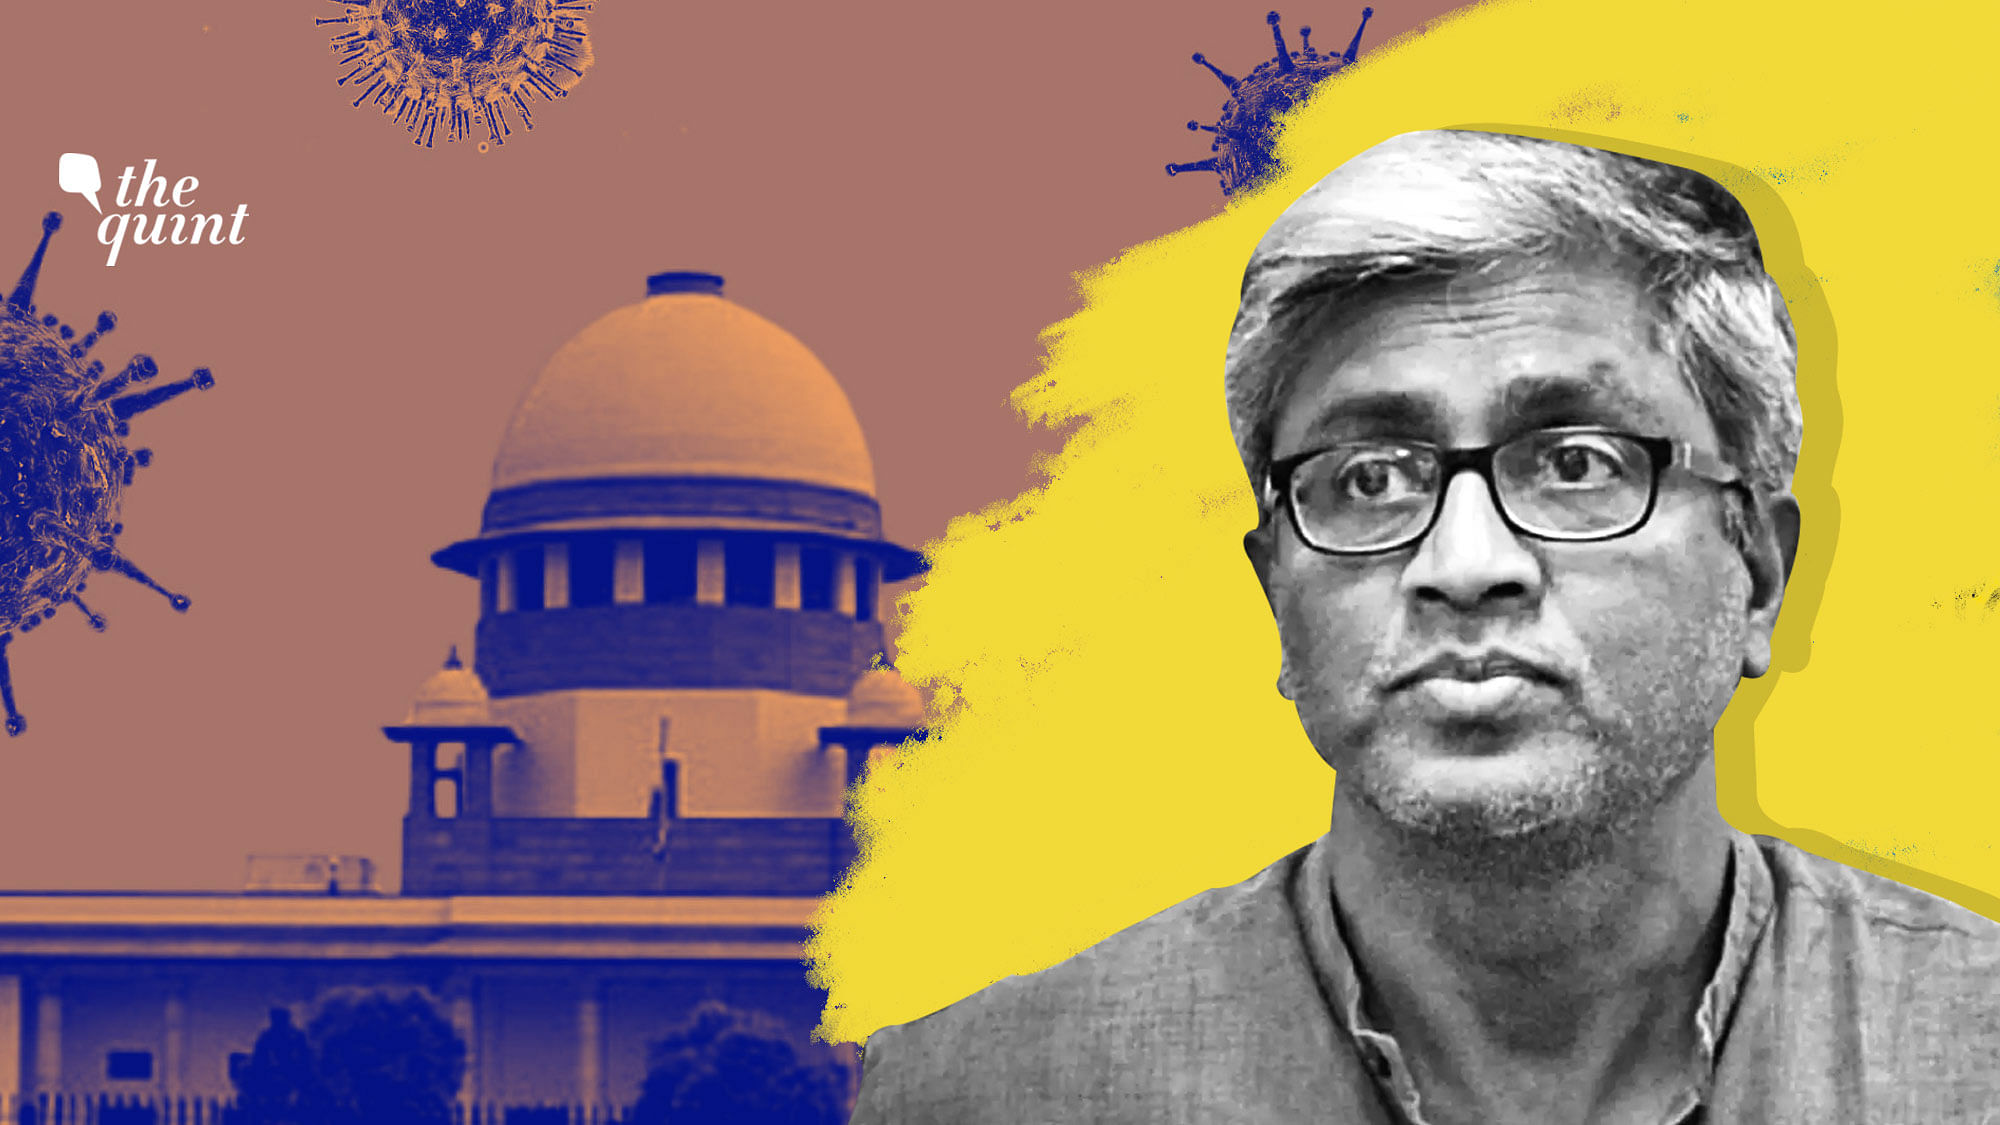 Image of Ashutosh, the author of the op-ed, used for representational purposes.